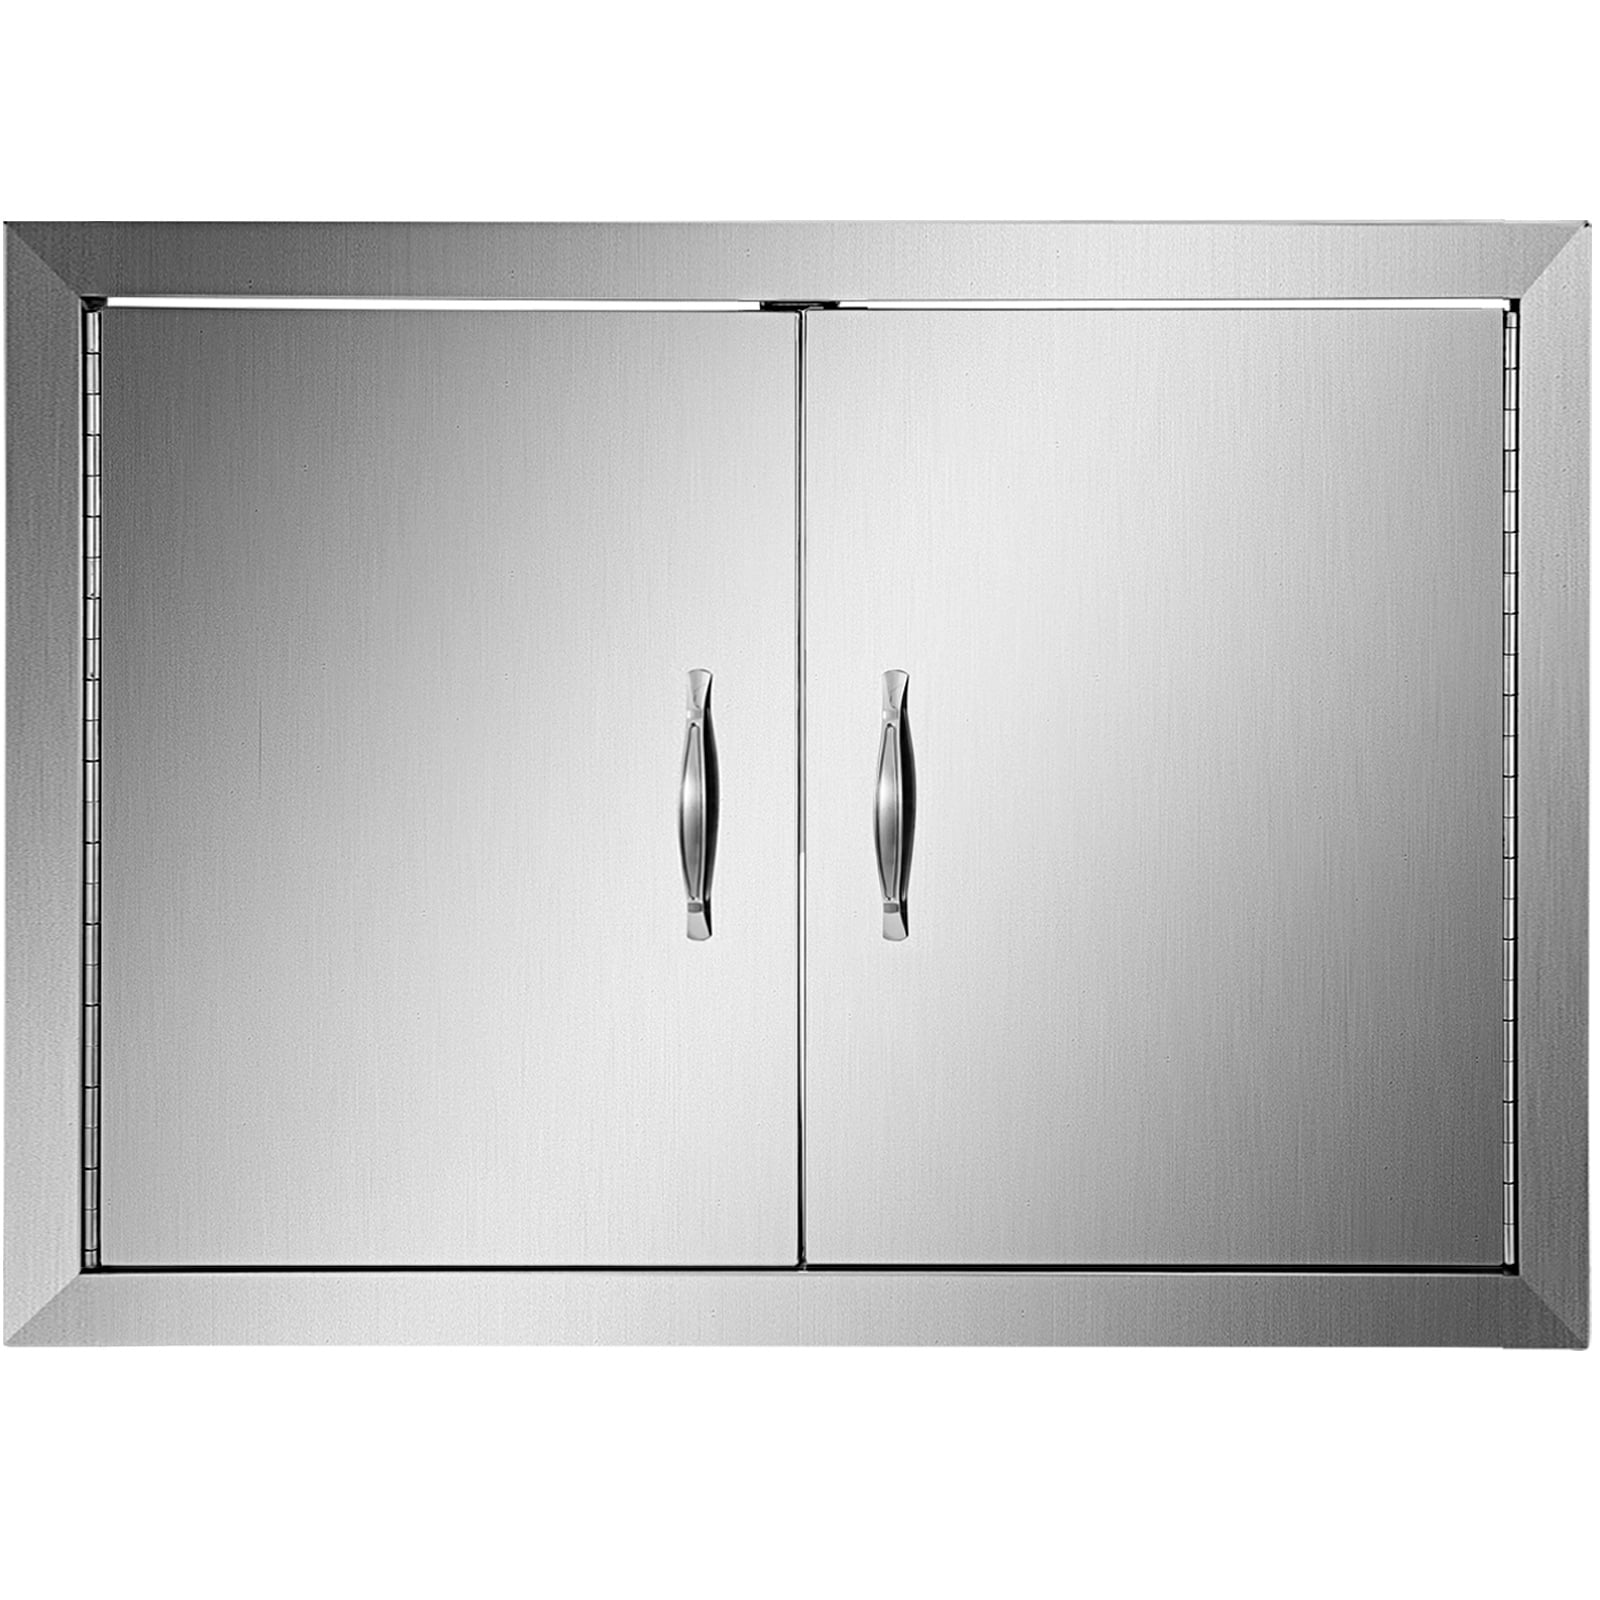 Mophorn BBQ Access Door 42W X 21H Inch Stainless Steel Double BBQ Island Doors Outdoor Kitchen Doors for Commercial BBQ Island Grilling Station